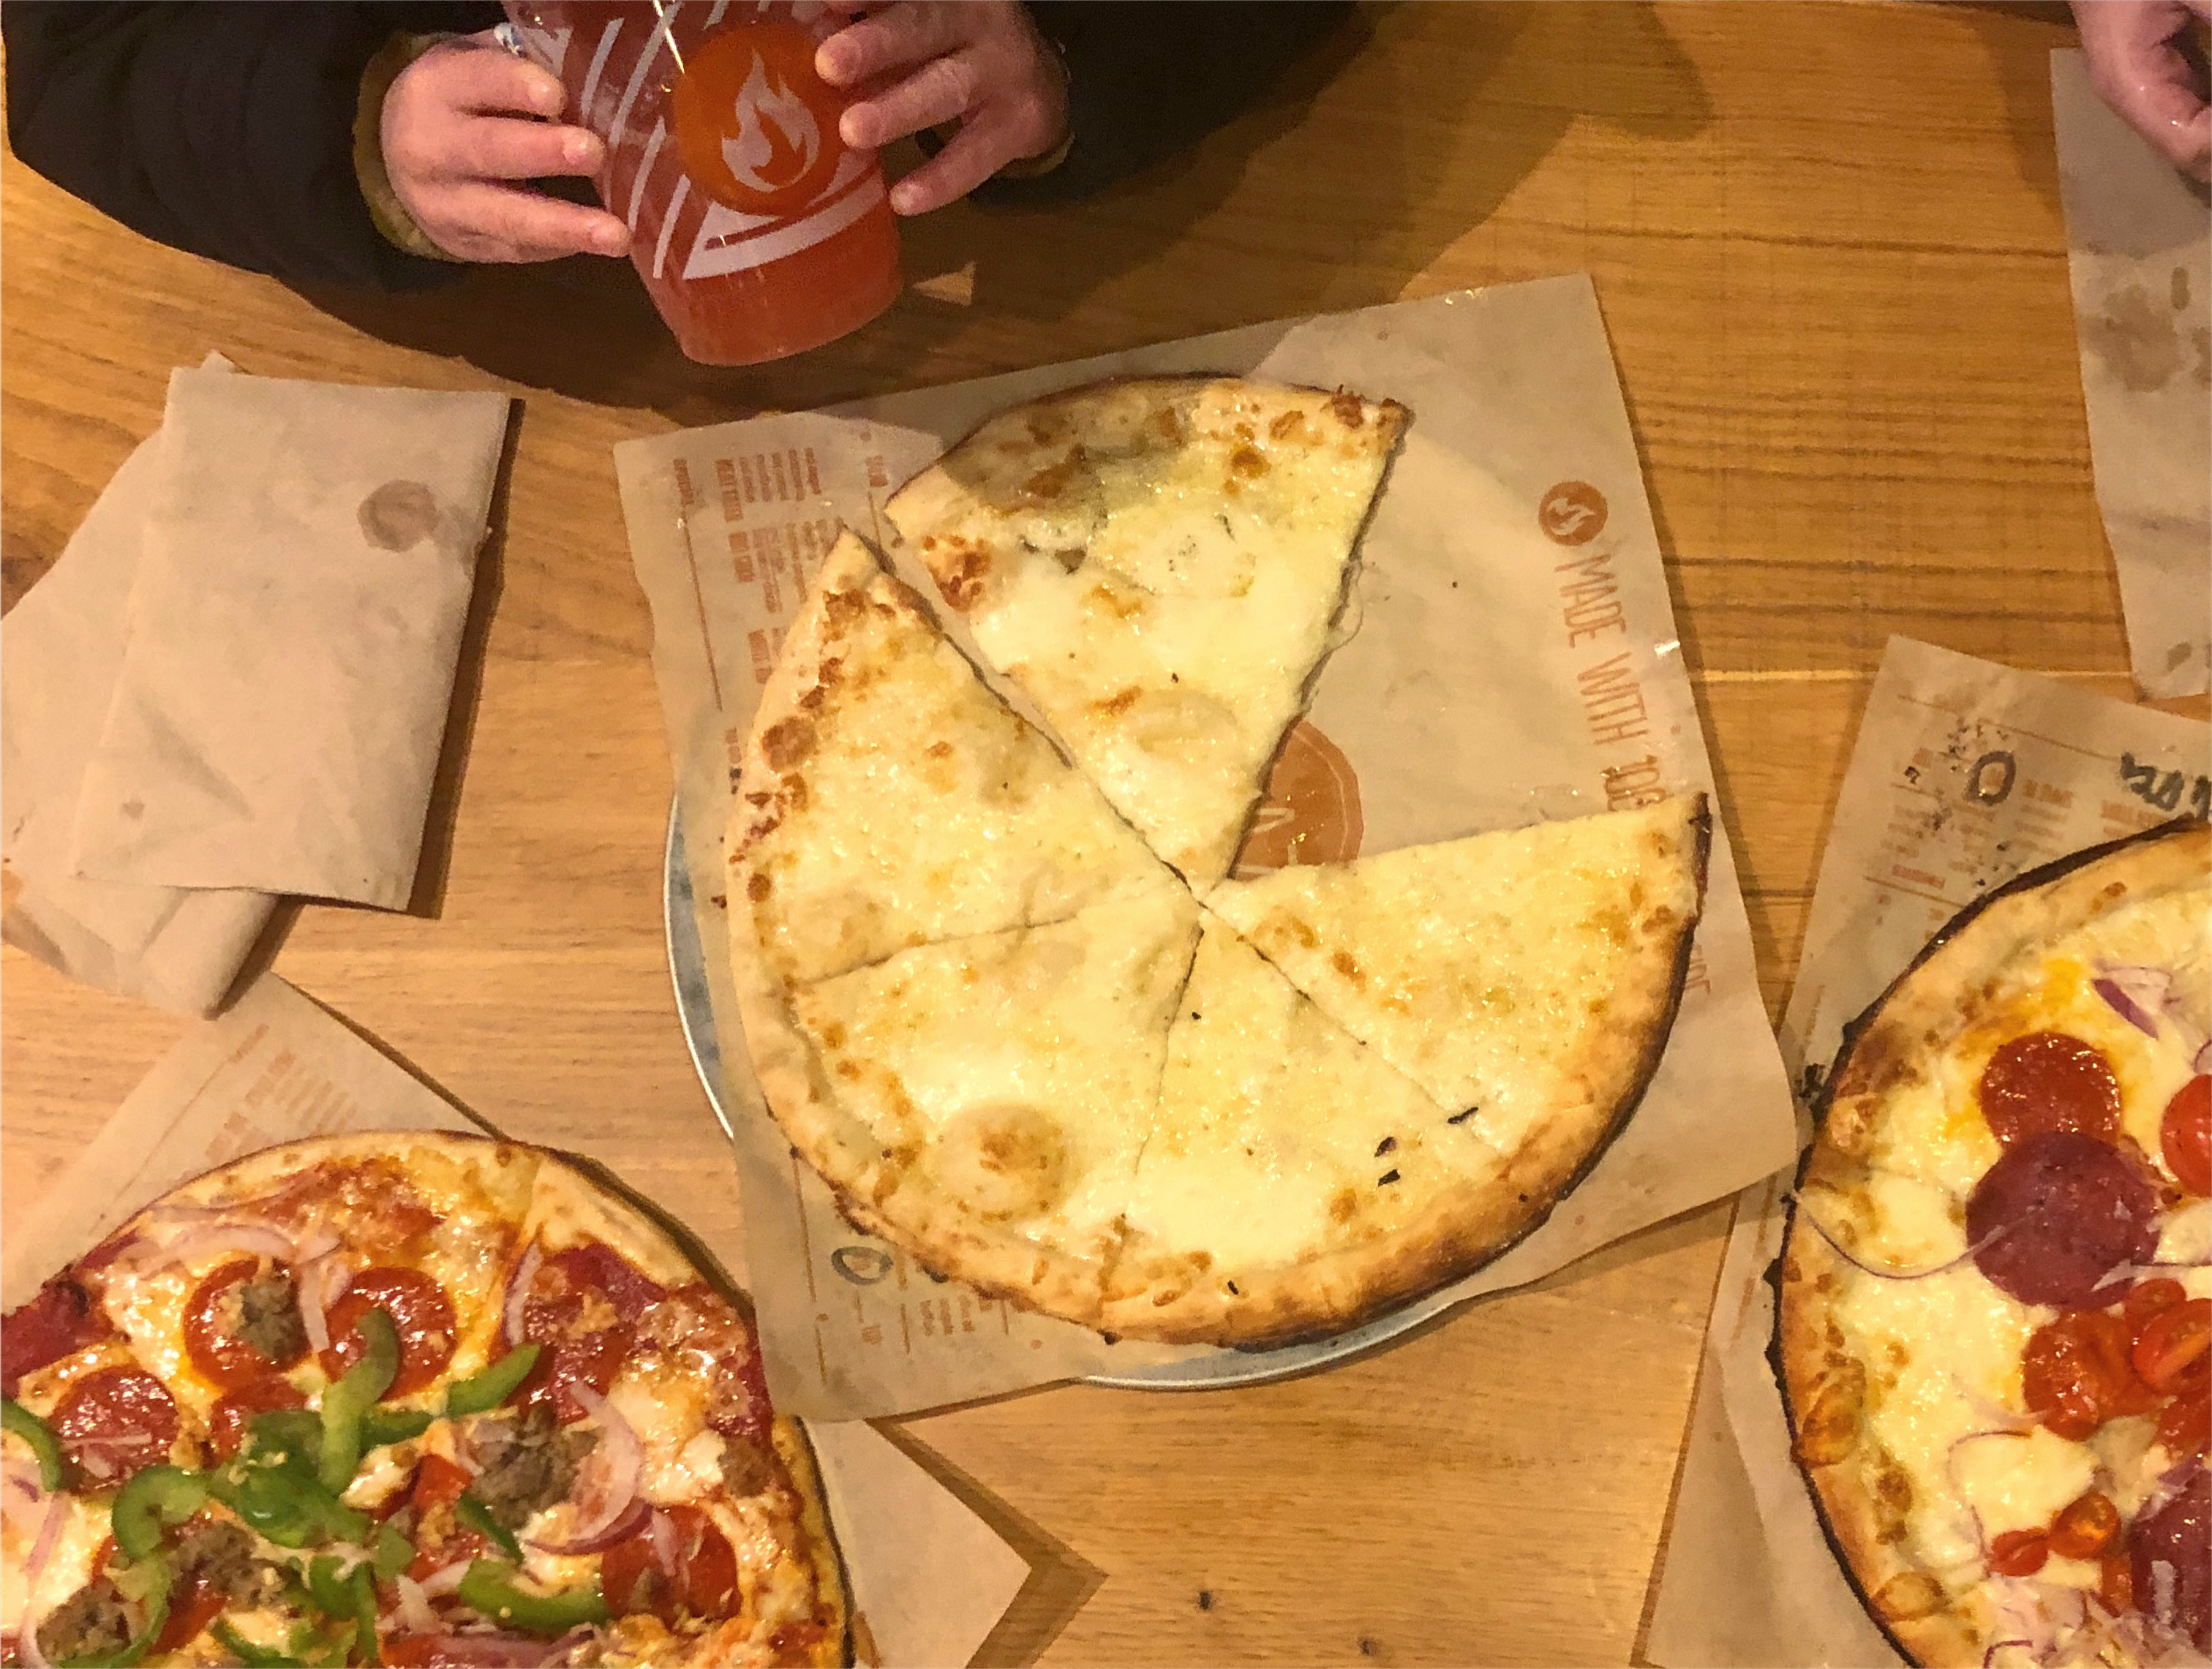 An overhead shot of a wooden table at Blaze Pizza. Two pizzas with toppings are cut off on the bottom, and in the center is a plain cheese pizza with one slice missing. Photo by Alyssa Buckley.